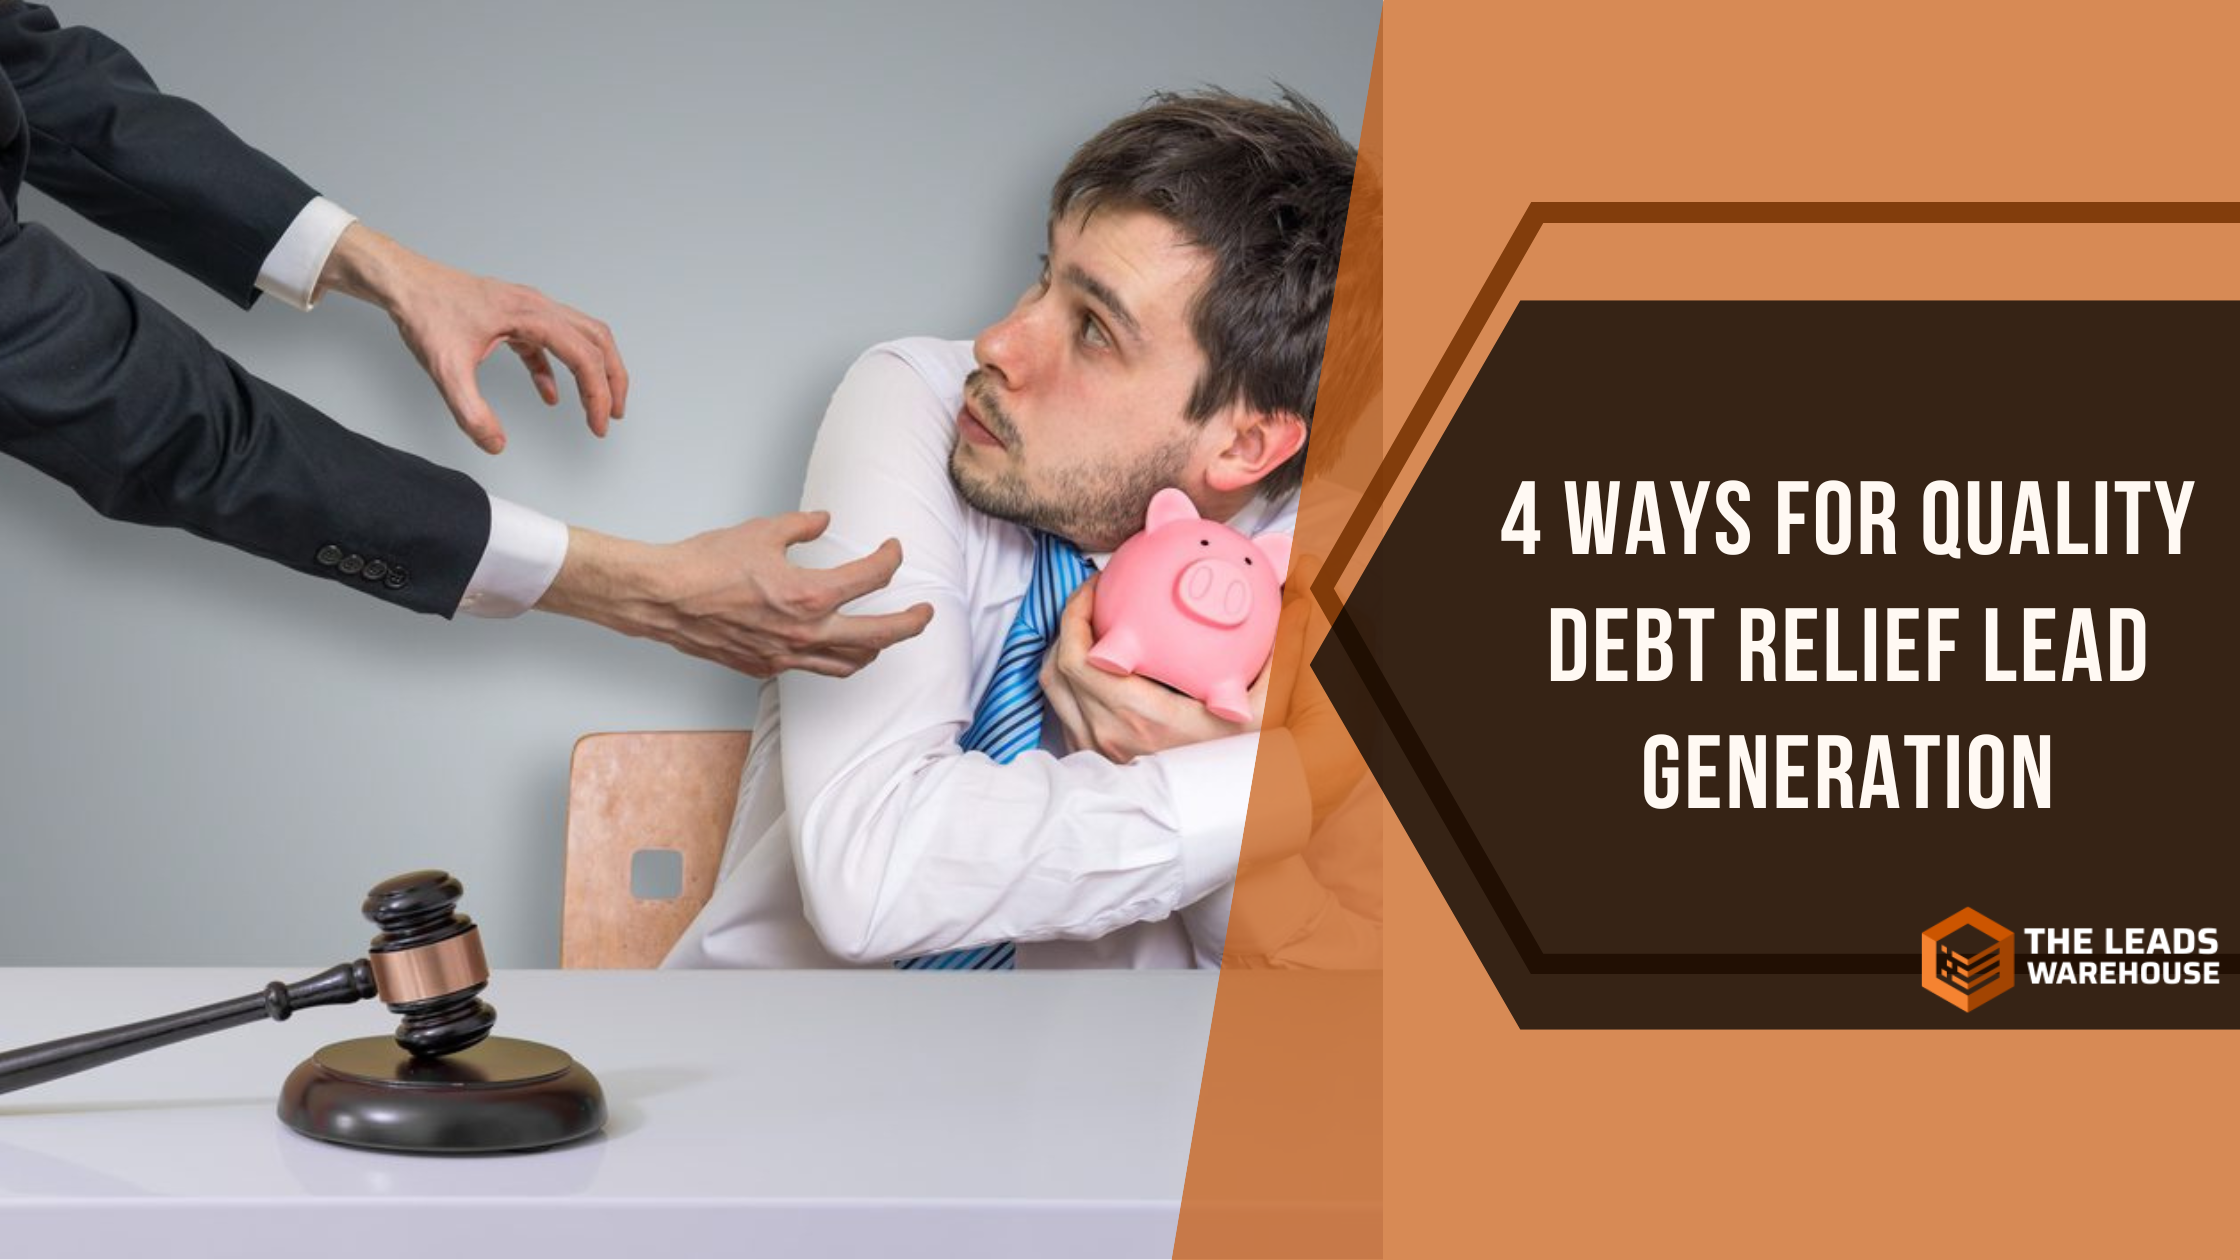 4 Ways For Quality Debt Relief Lead Generation